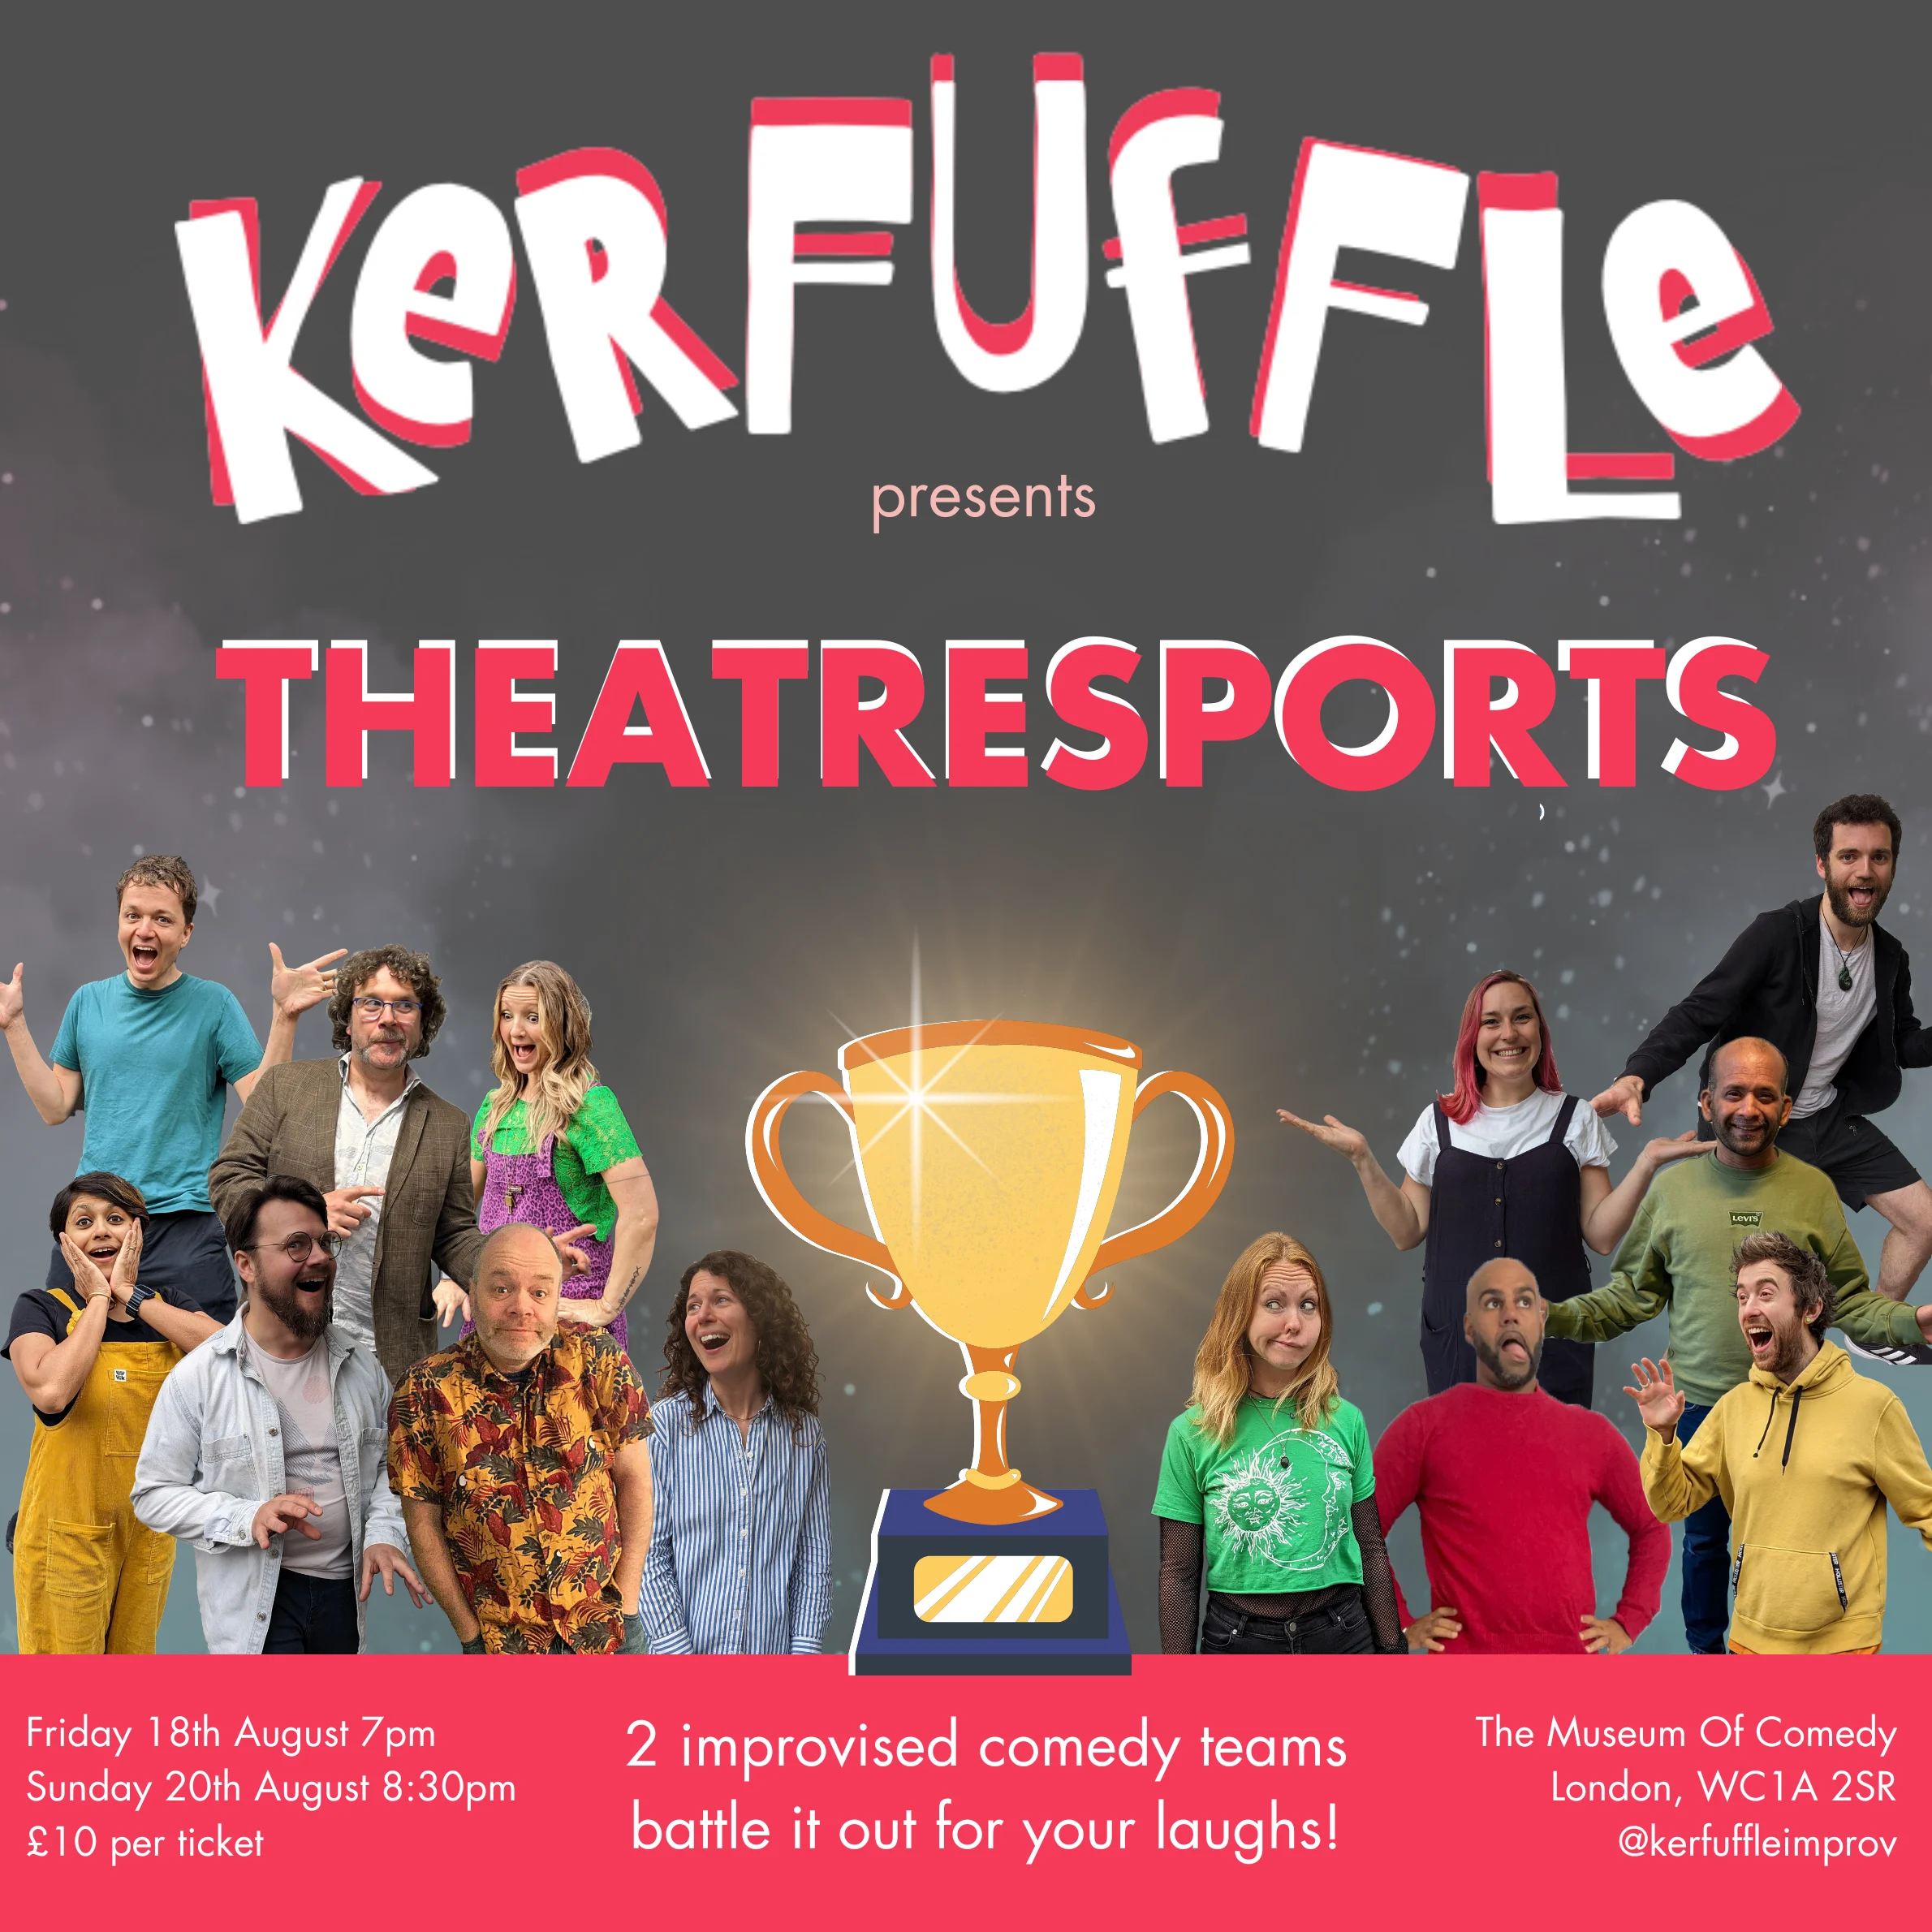 Comedy poster for the improv group Kerfuffle. Text reads "Kerfuffle presents Theatresports".  14 members of Kerfuffle are on the poster and there's a trophy in the middle.